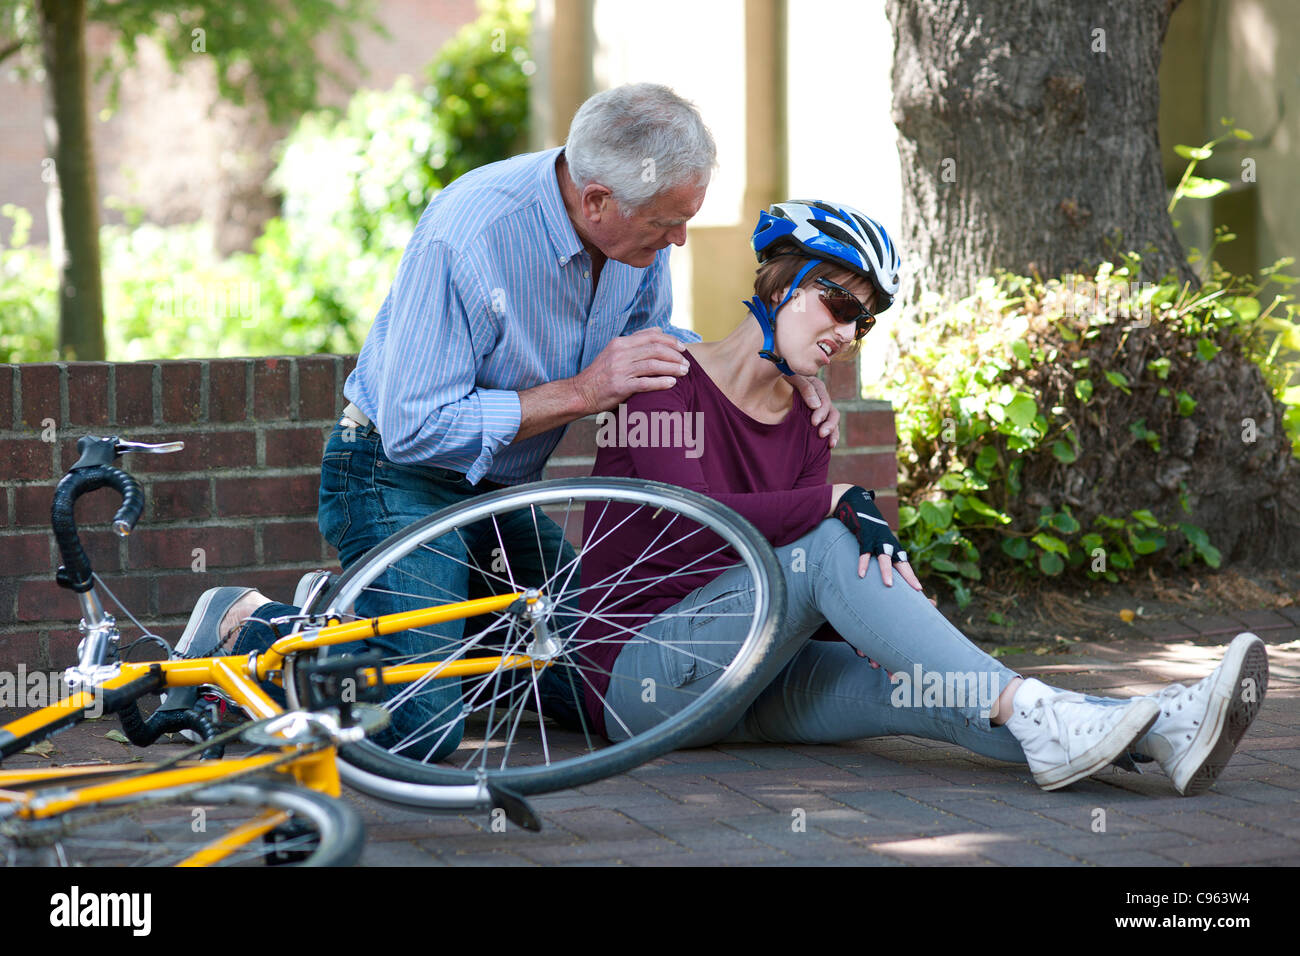 Cycling accident. Man helping a cyclist that has fallen from her bike. Stock Photo